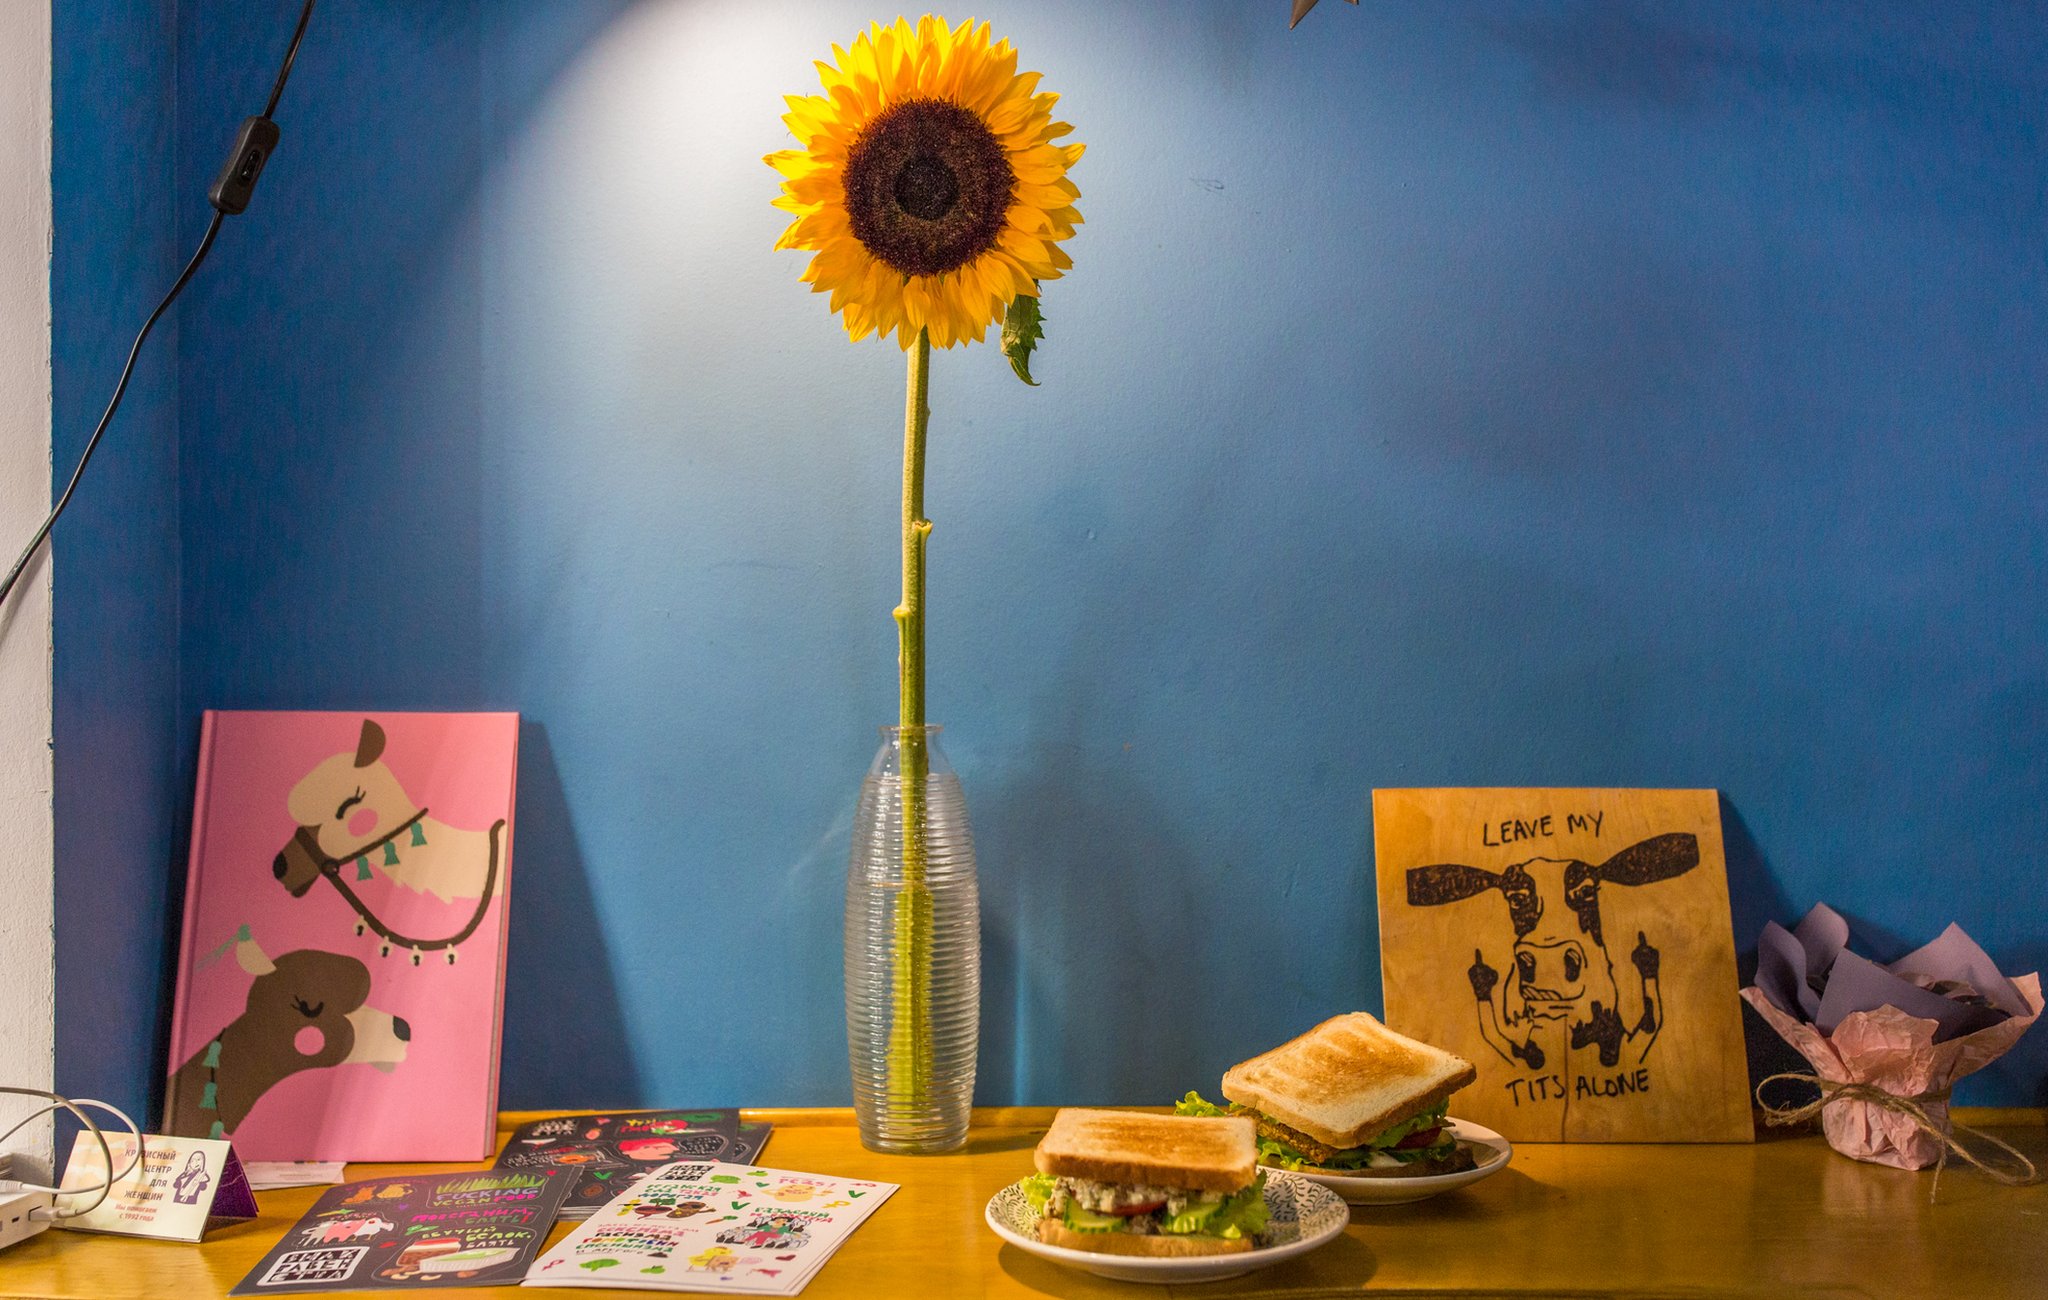 A drawing of a cow flipping off visitors with the message 'leave my tits alone', next to a sunflower in a vase on a table against a blue wall